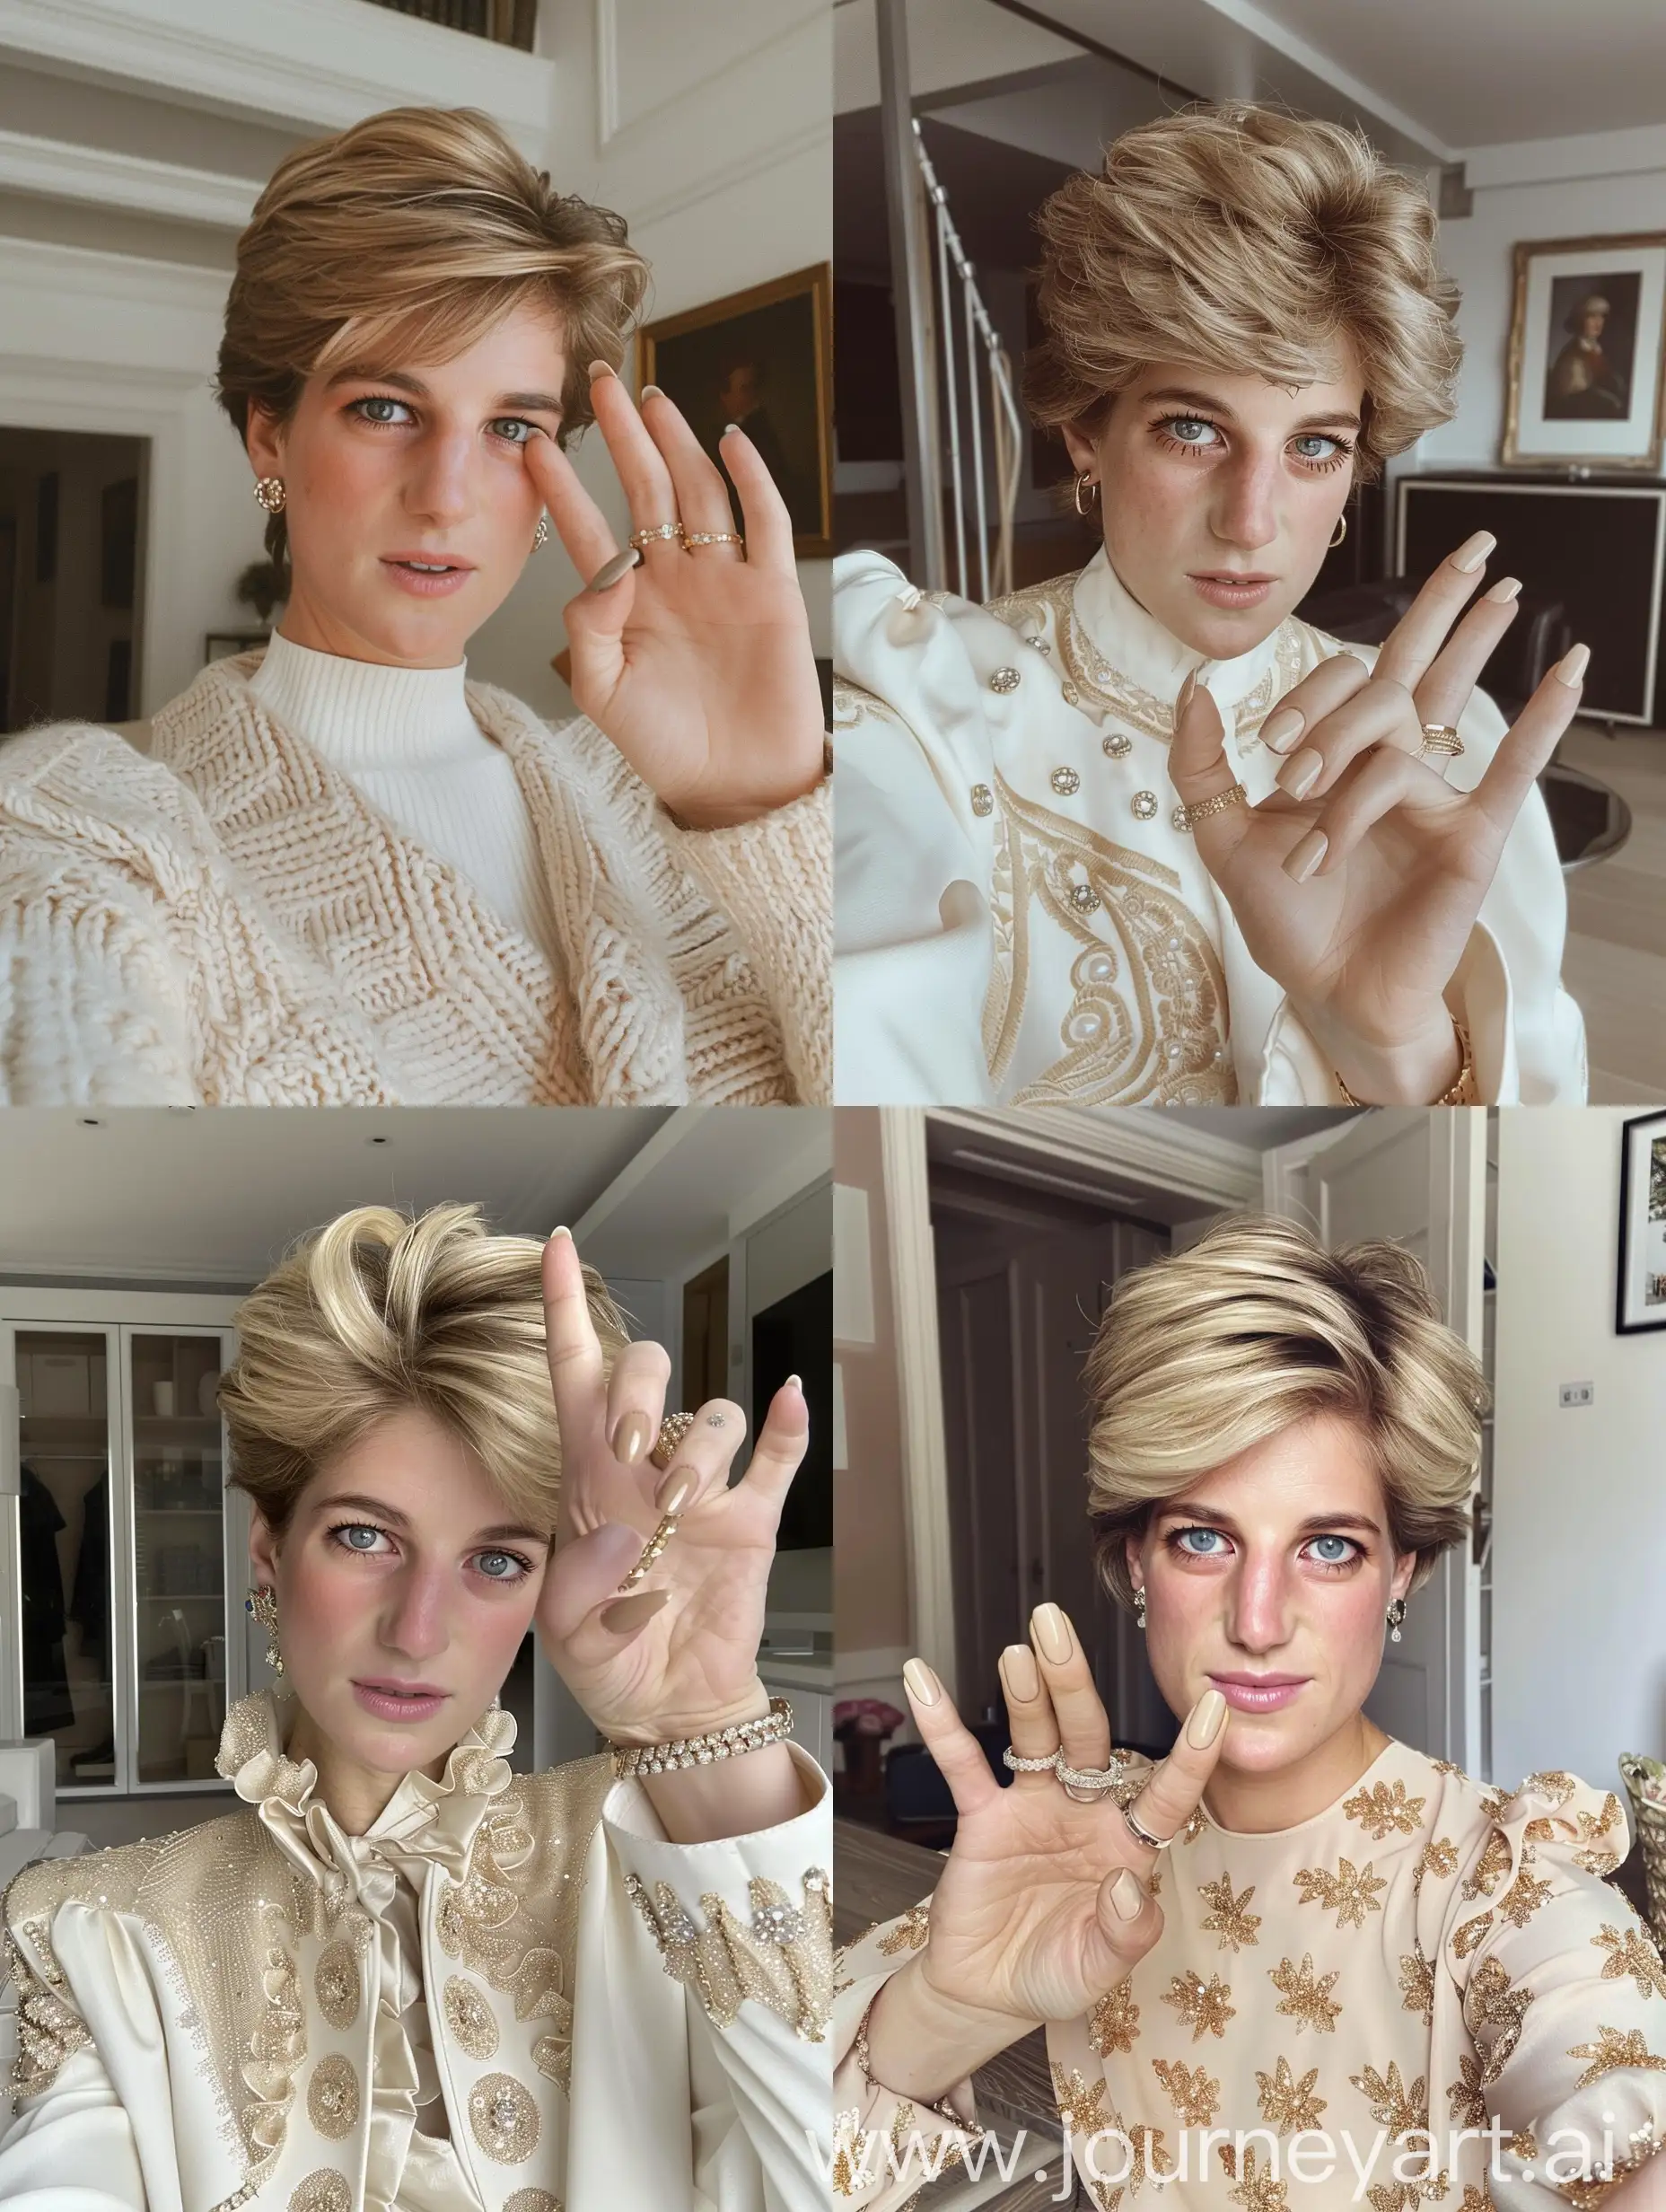 Aesthetic Instagram selfie of princess Diana wearing modern clothes, in a modern London flat, close up selfie, manicured, beige gel nail polish, one hand up, rings